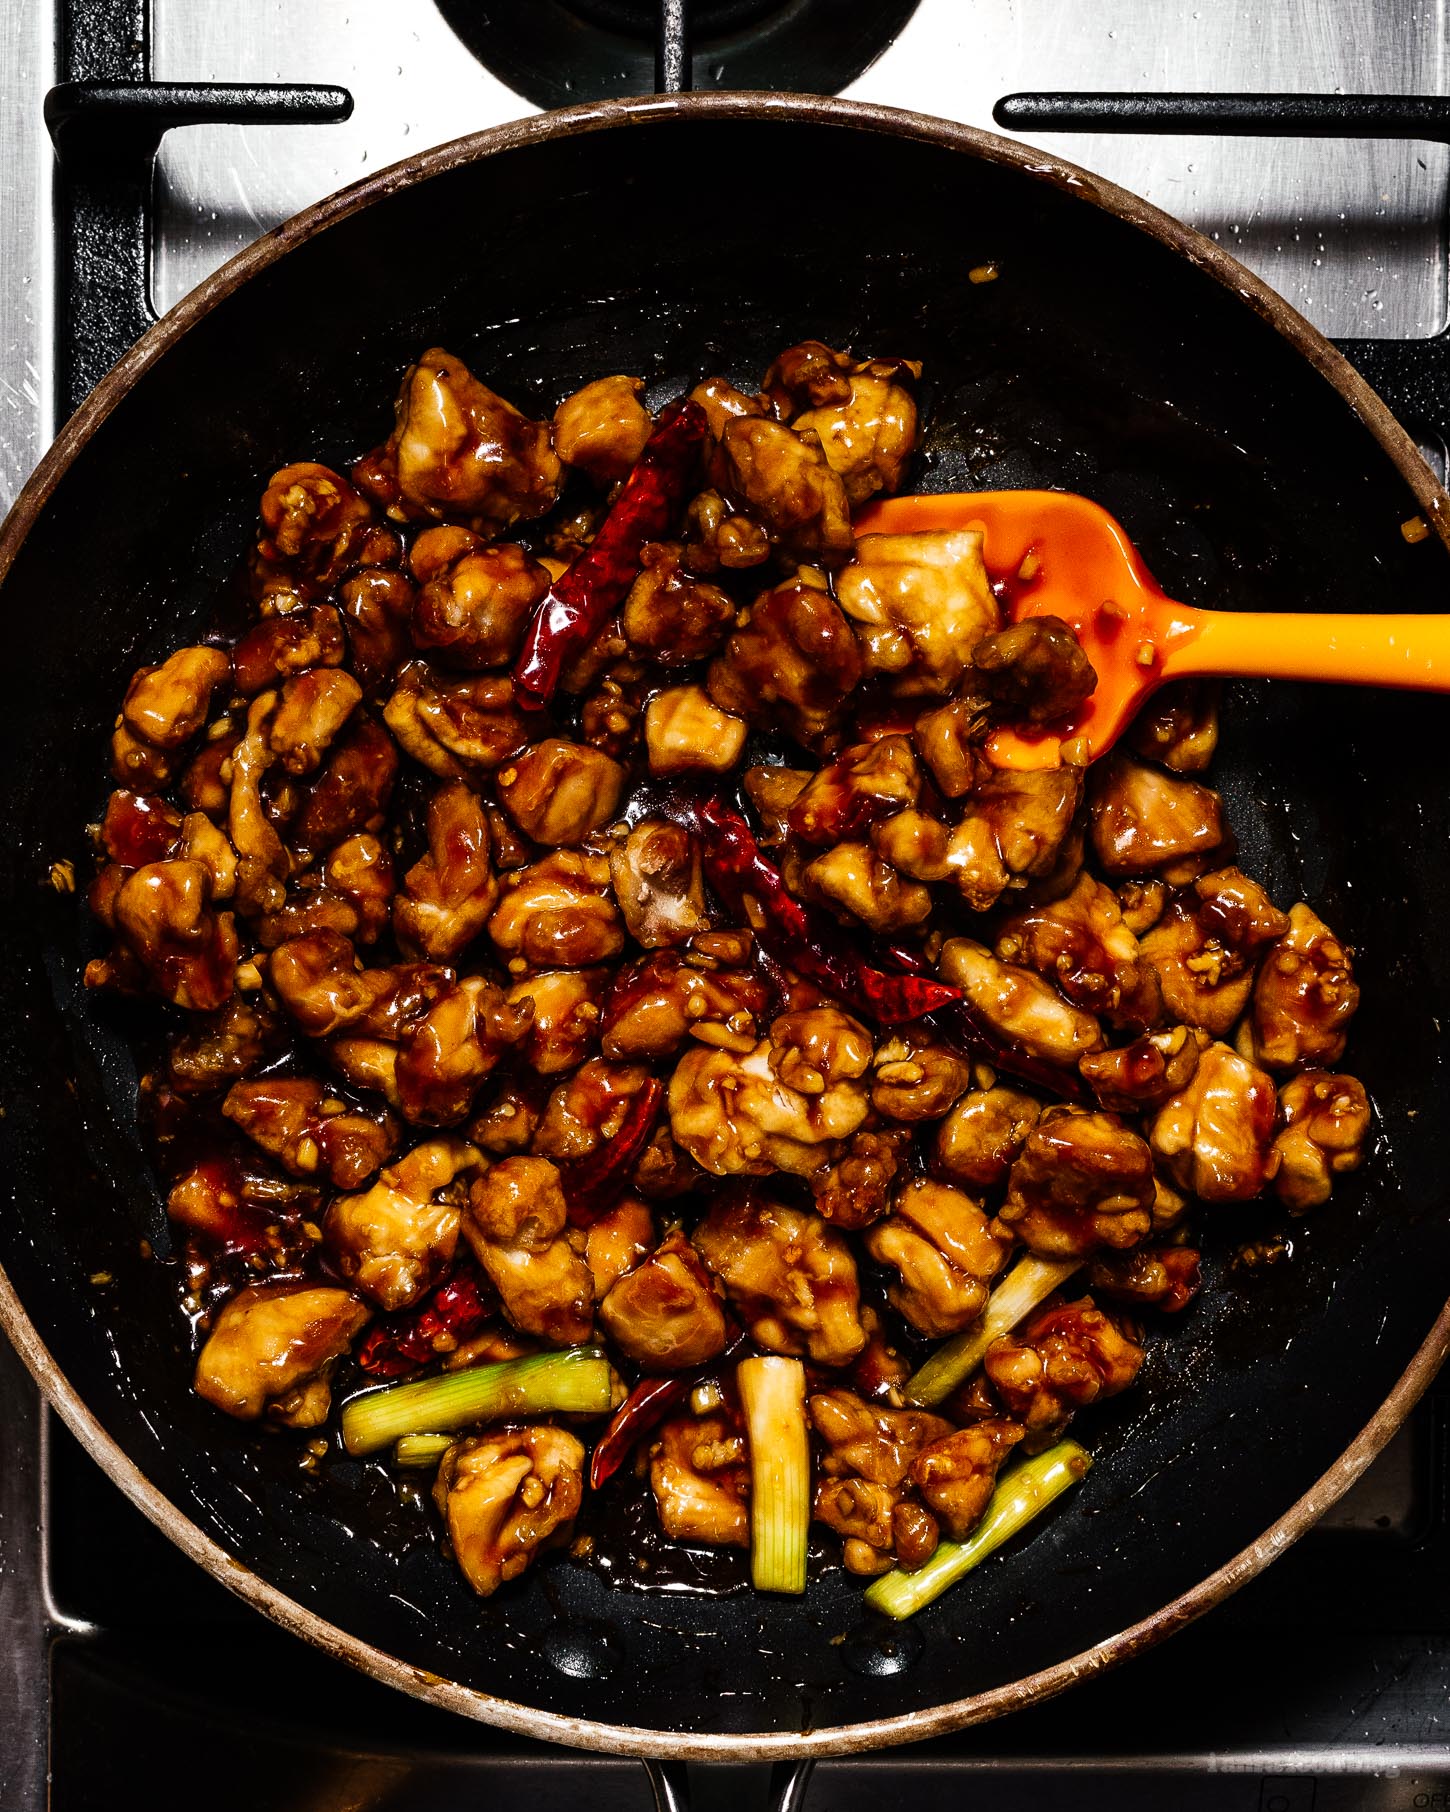 An Easy & Healthy Oven Baked General Tso's Chicken Recipe | www.iamafoodblog.com